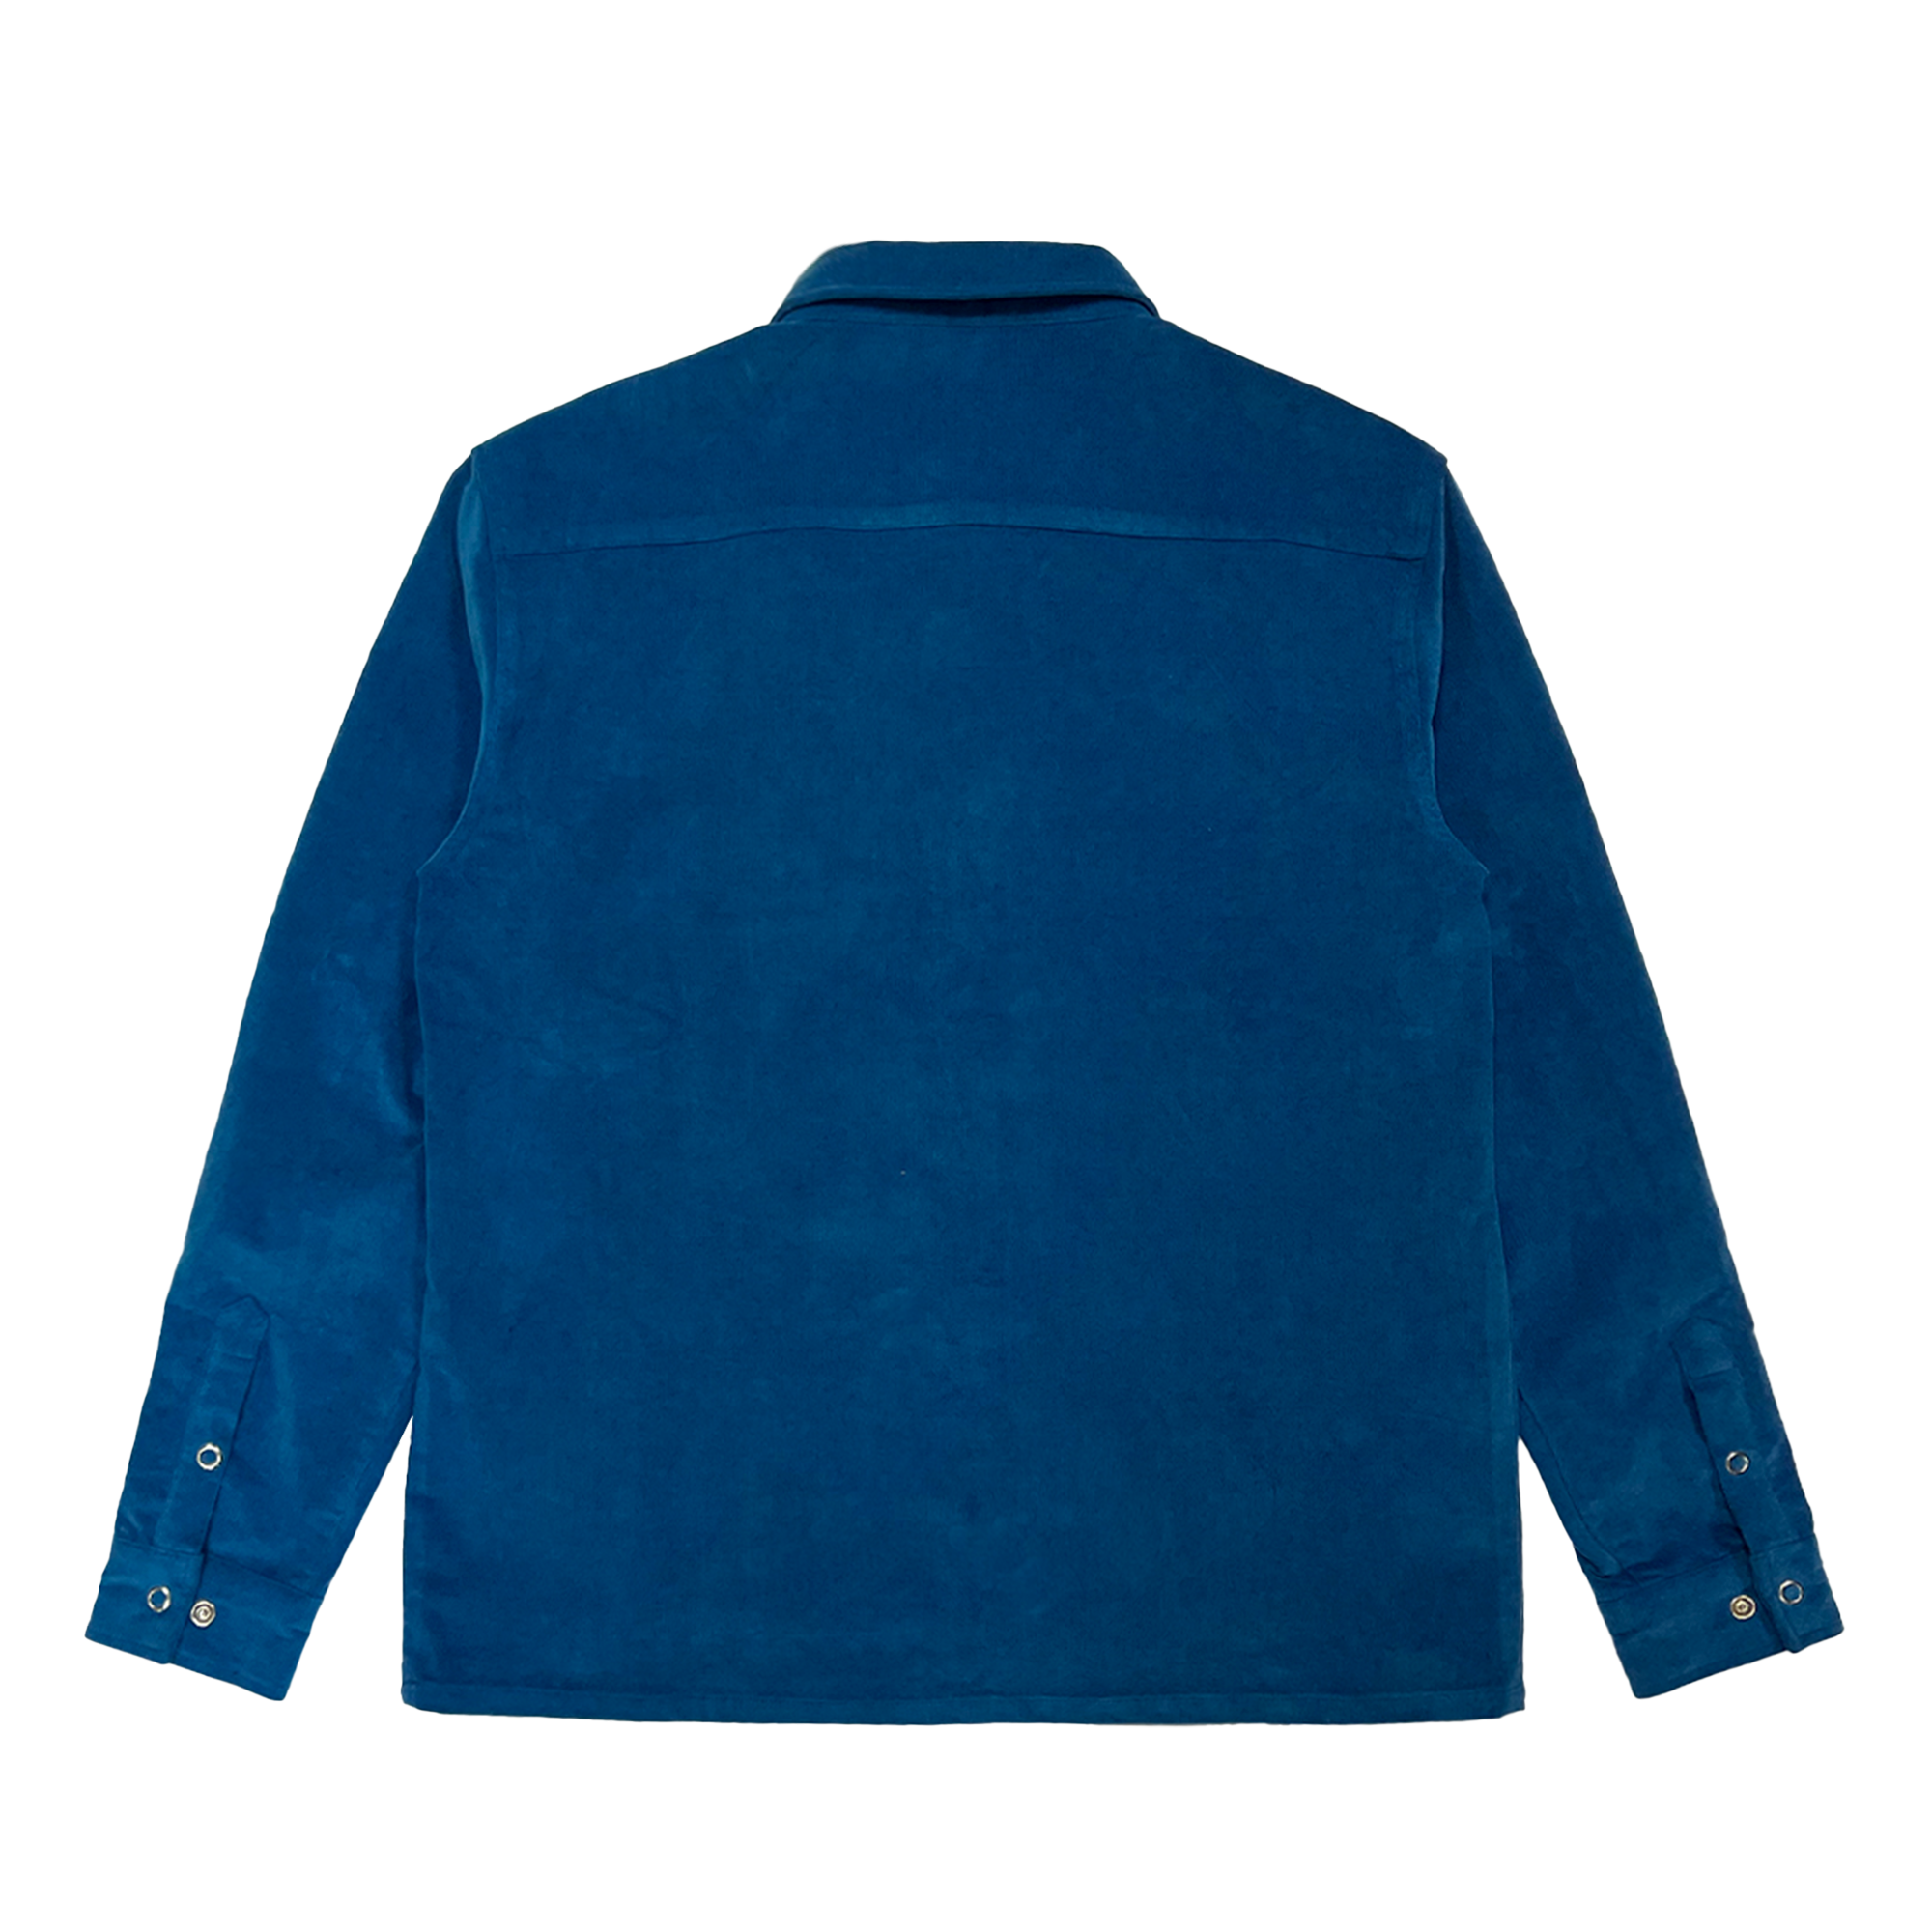 The Salvages 'Sublime' Classic Shirt with Emblem Snaps in Electric Blue